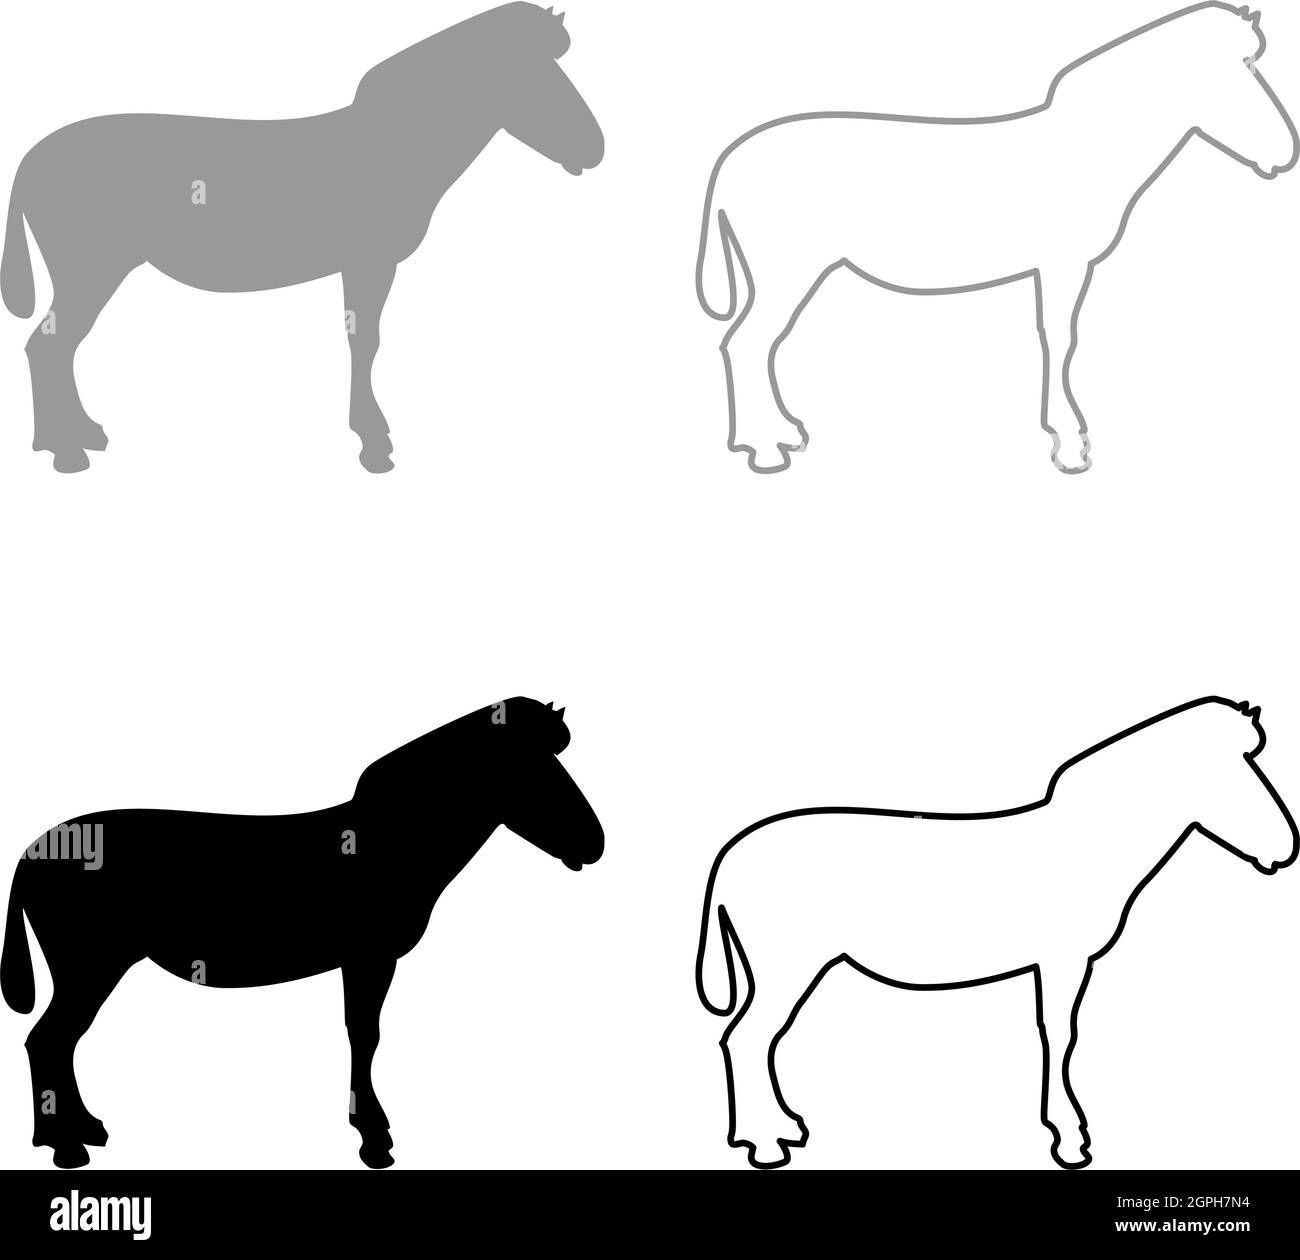 Zebra stand Animal standing silhouette grey black color vector illustration solid outline style image Stock Vector